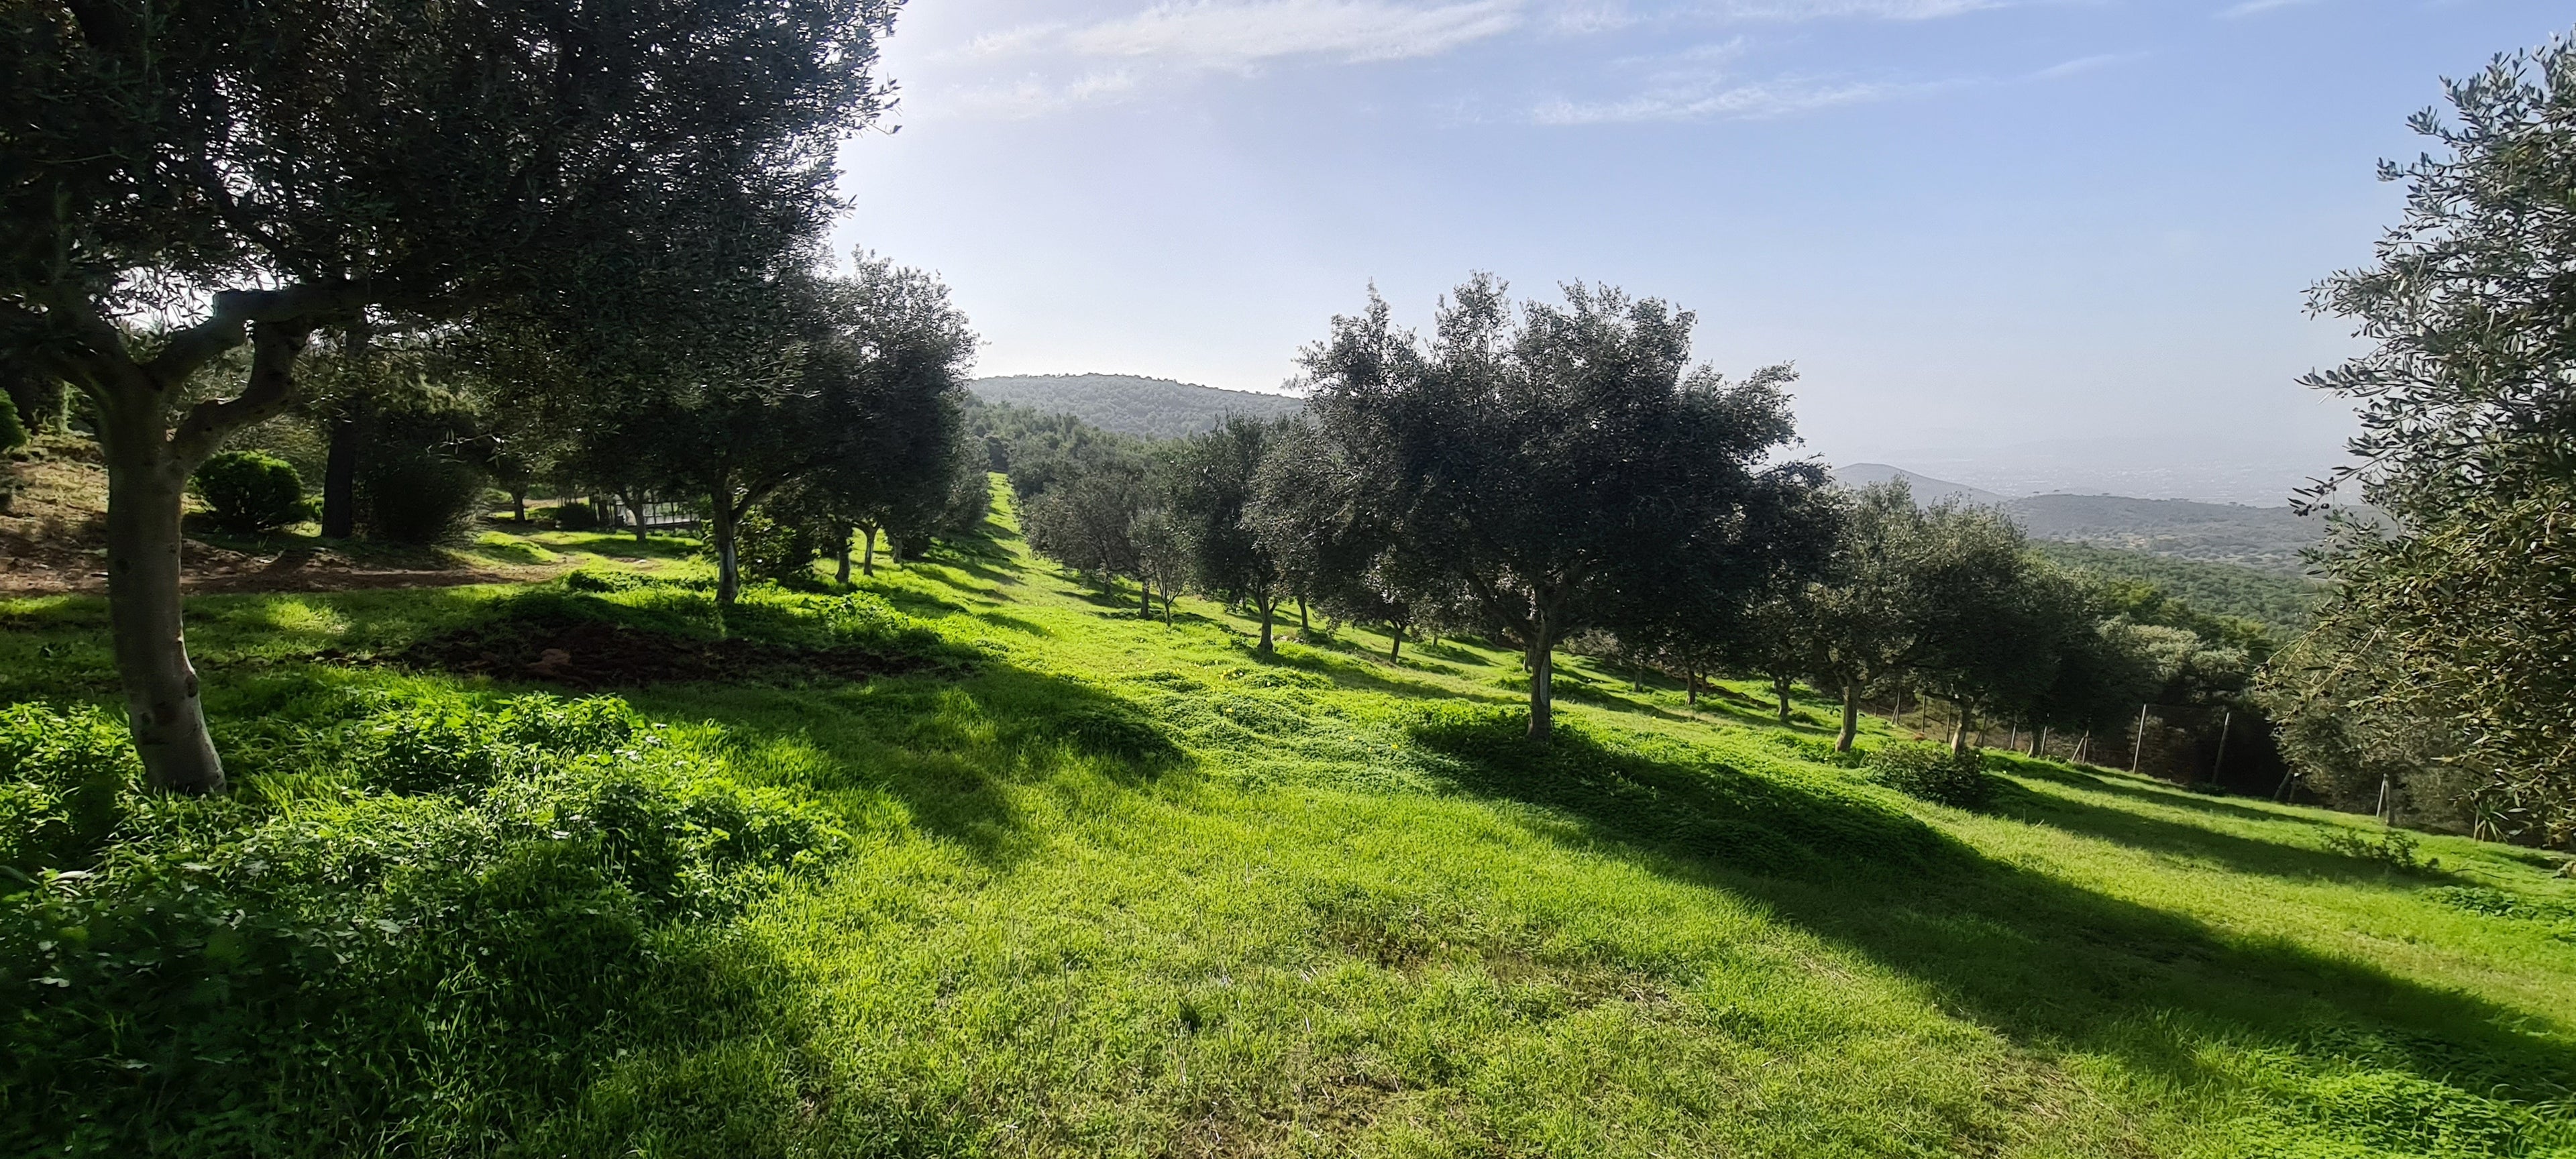 The LAI olive grove in January 2021.